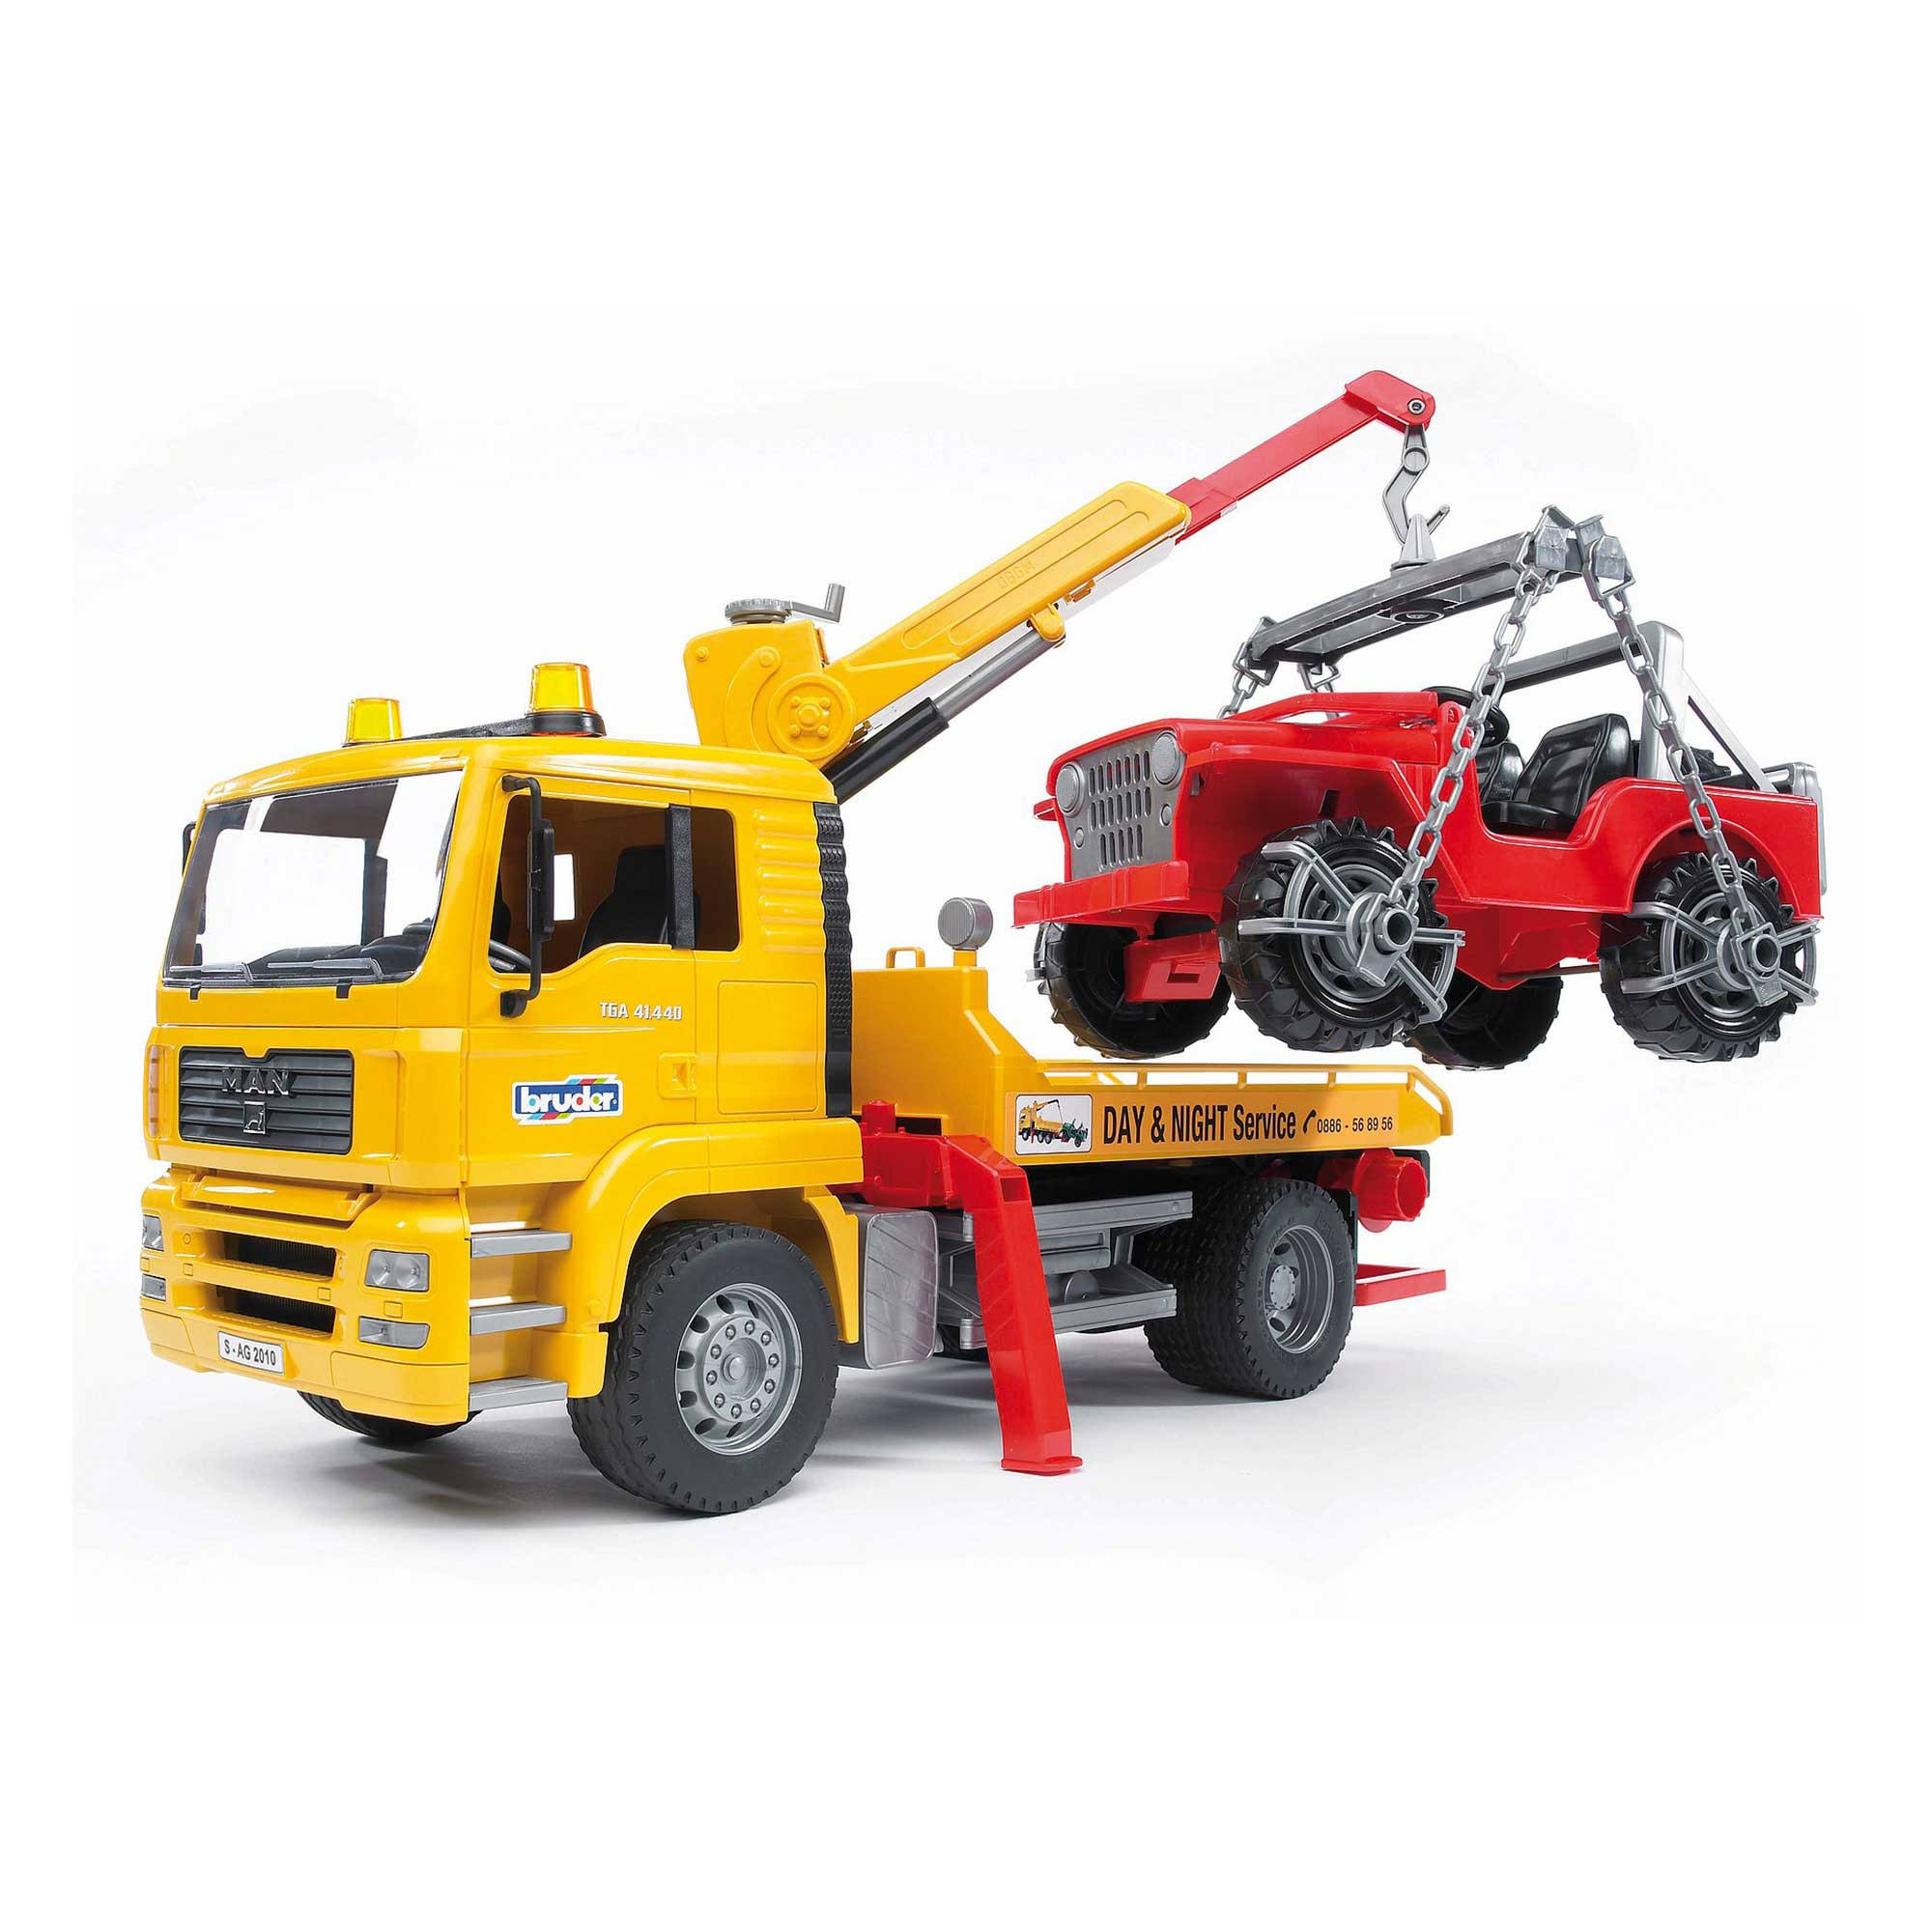 Bruder Man Tga Tow Truck with Cross Country Vehicle Toy